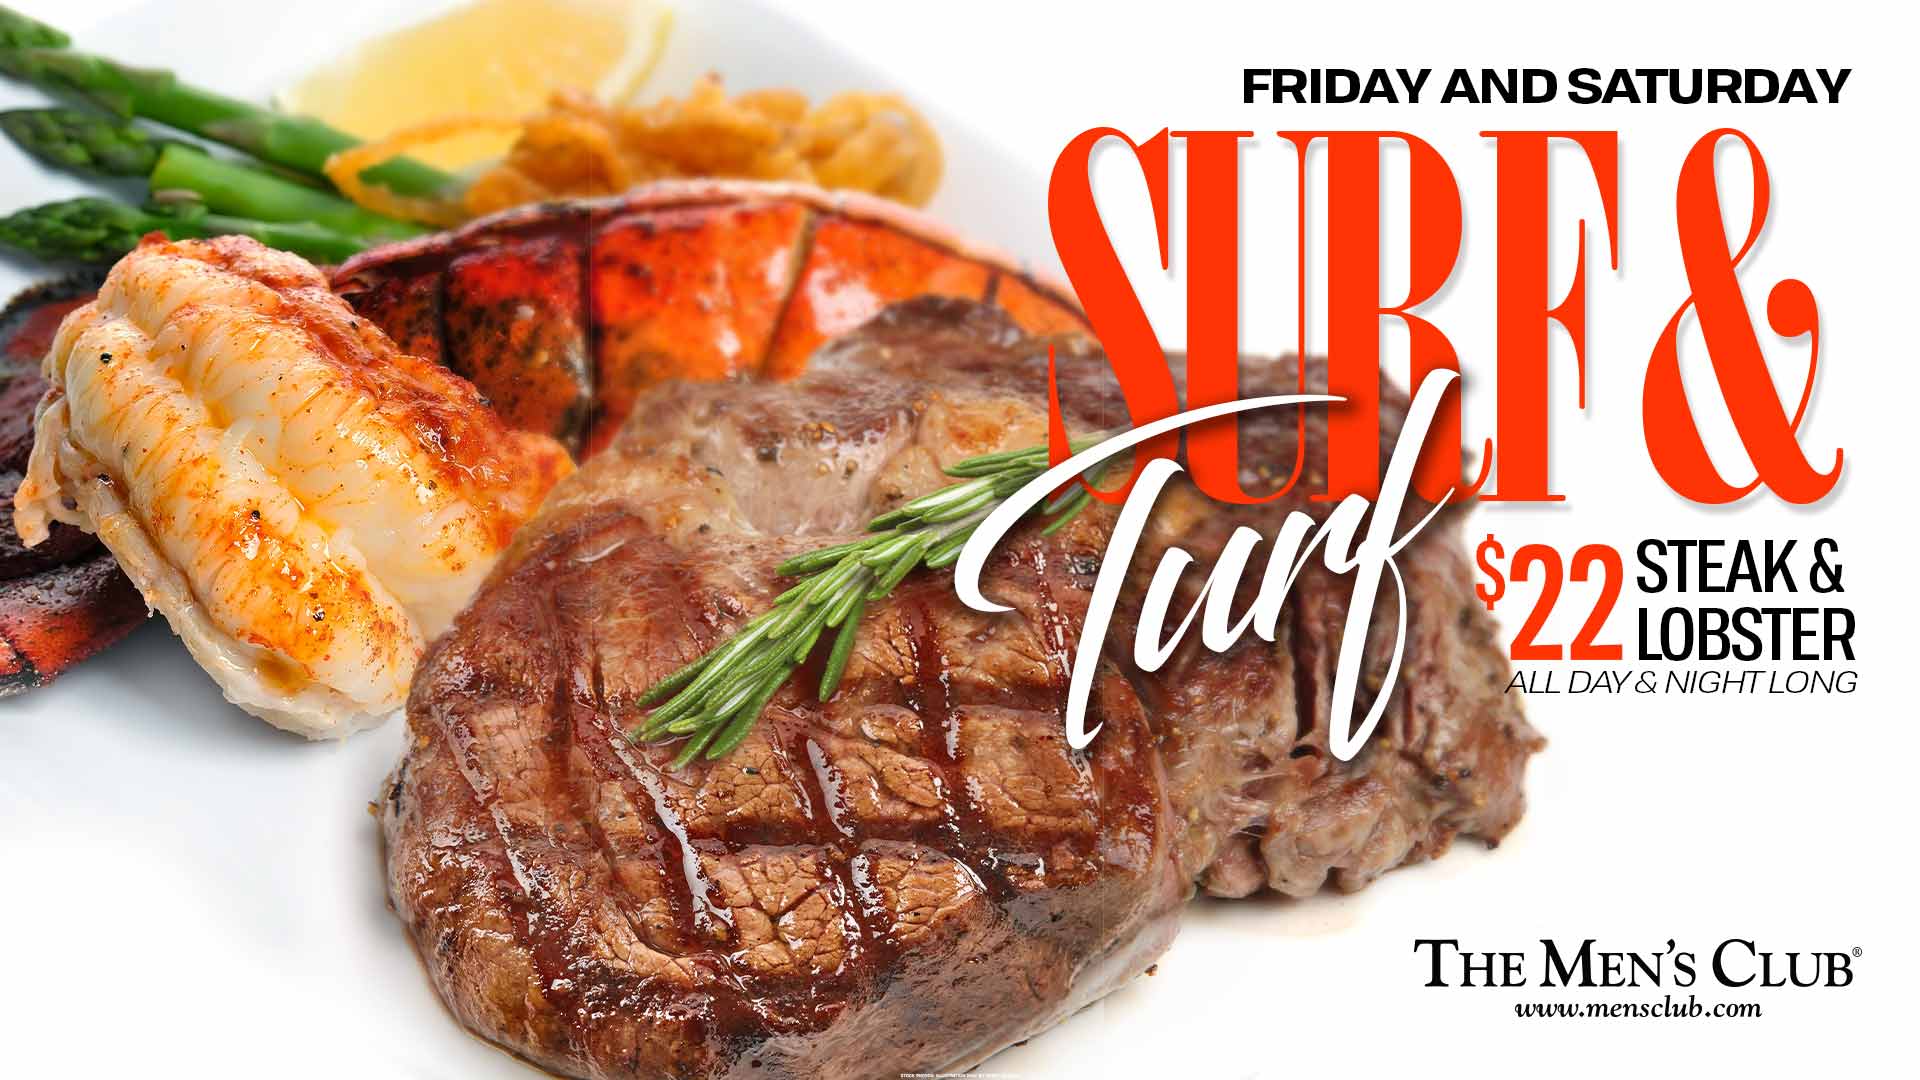 image of surf and turf steak and lobster for $20 at The Men's Club of Dallas